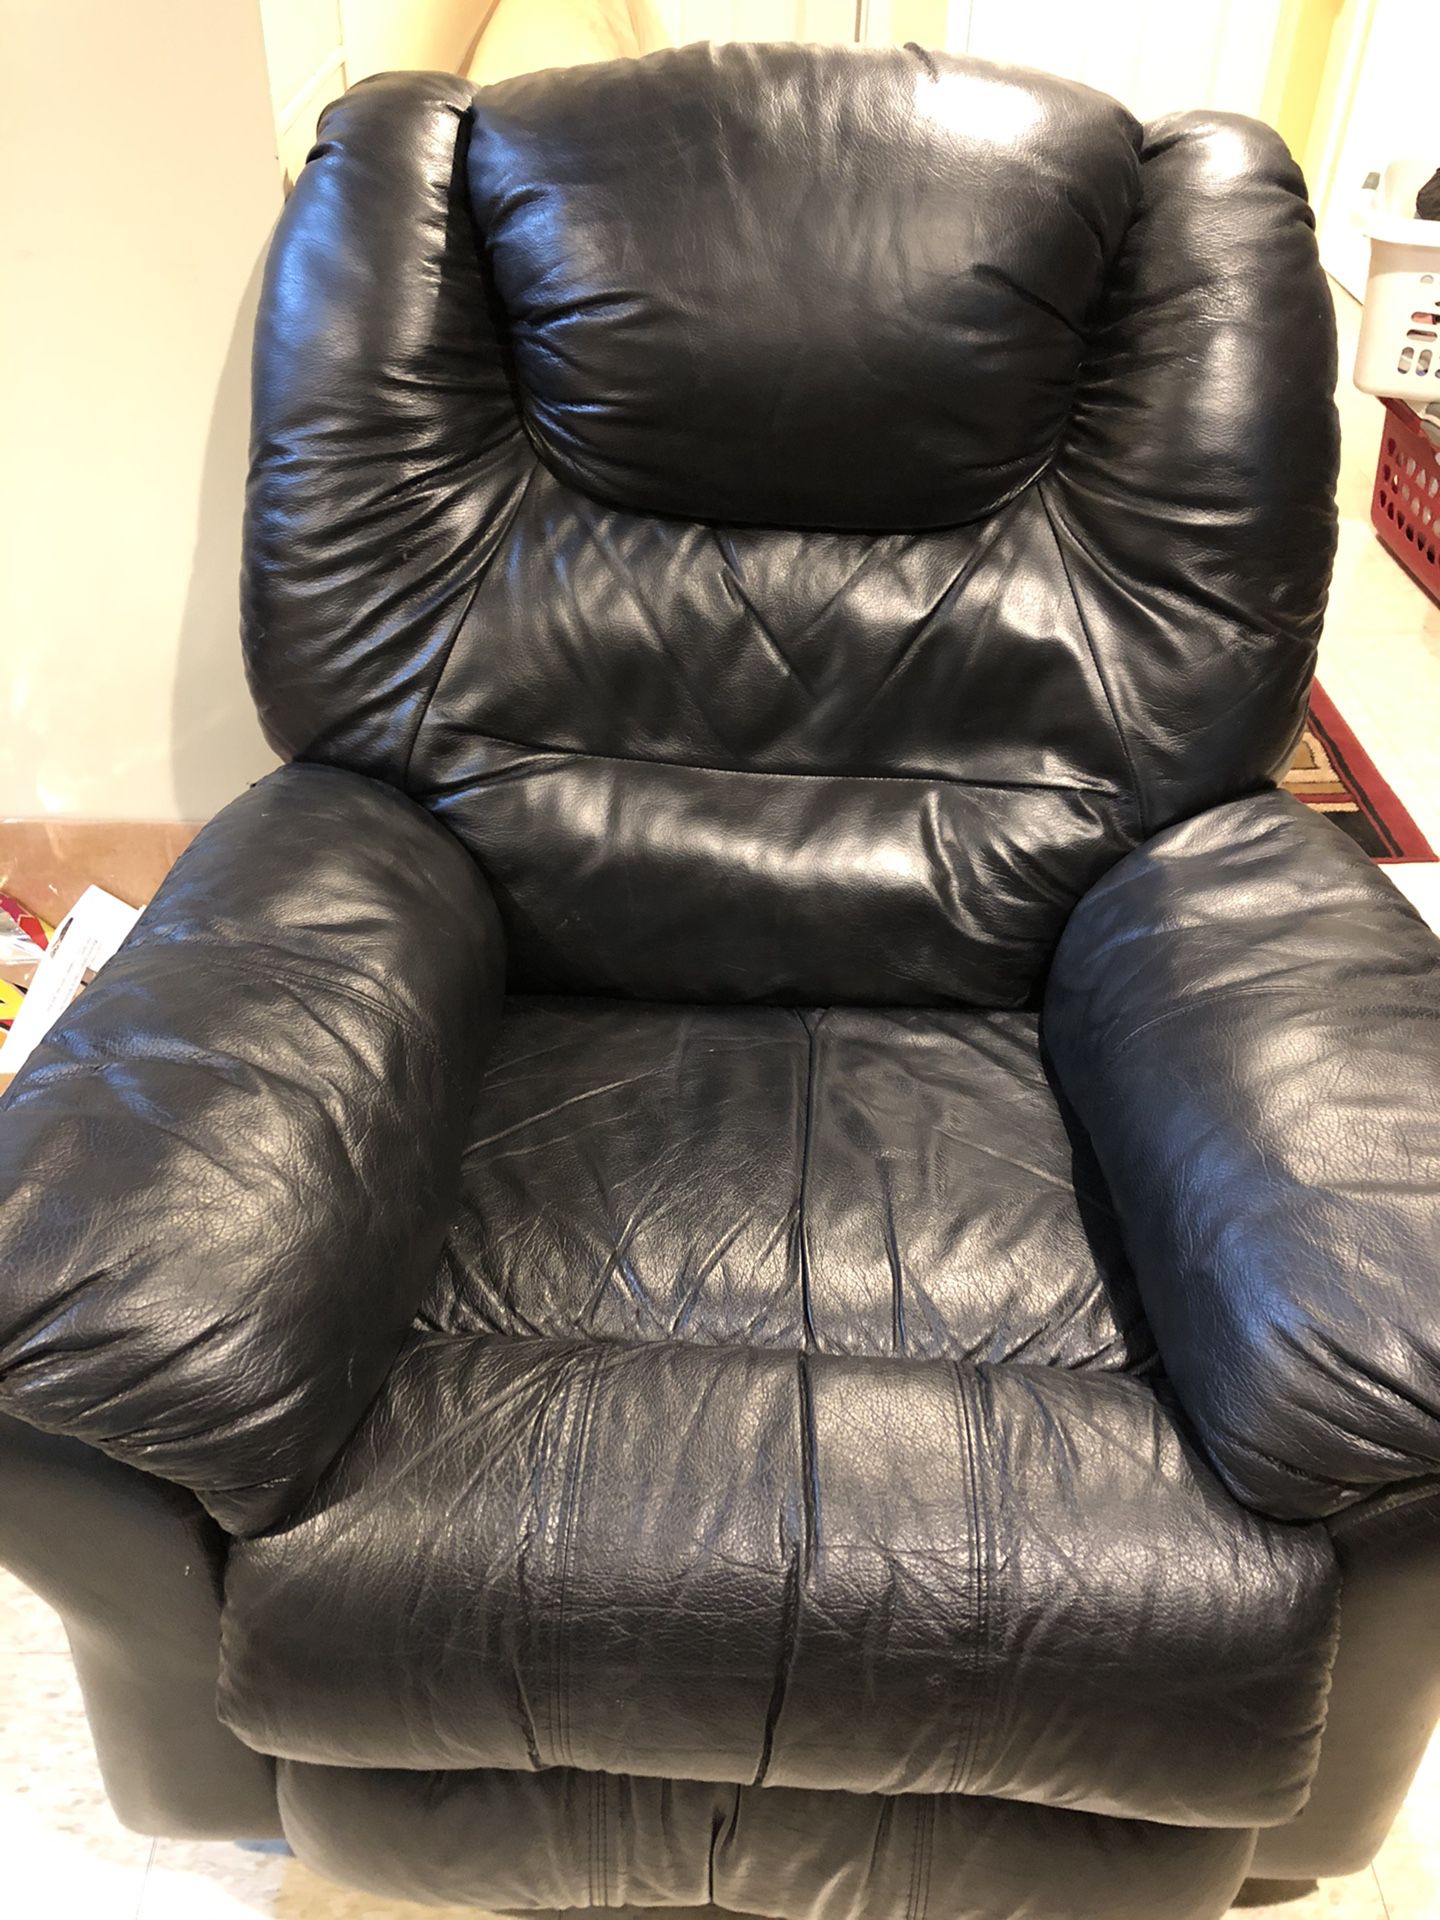 Two solid wood frame futons with 8 inch innerspring mattress 150.00 each. Black leather recliner 75.00, King upholstered headboard 100.00, sub woofer